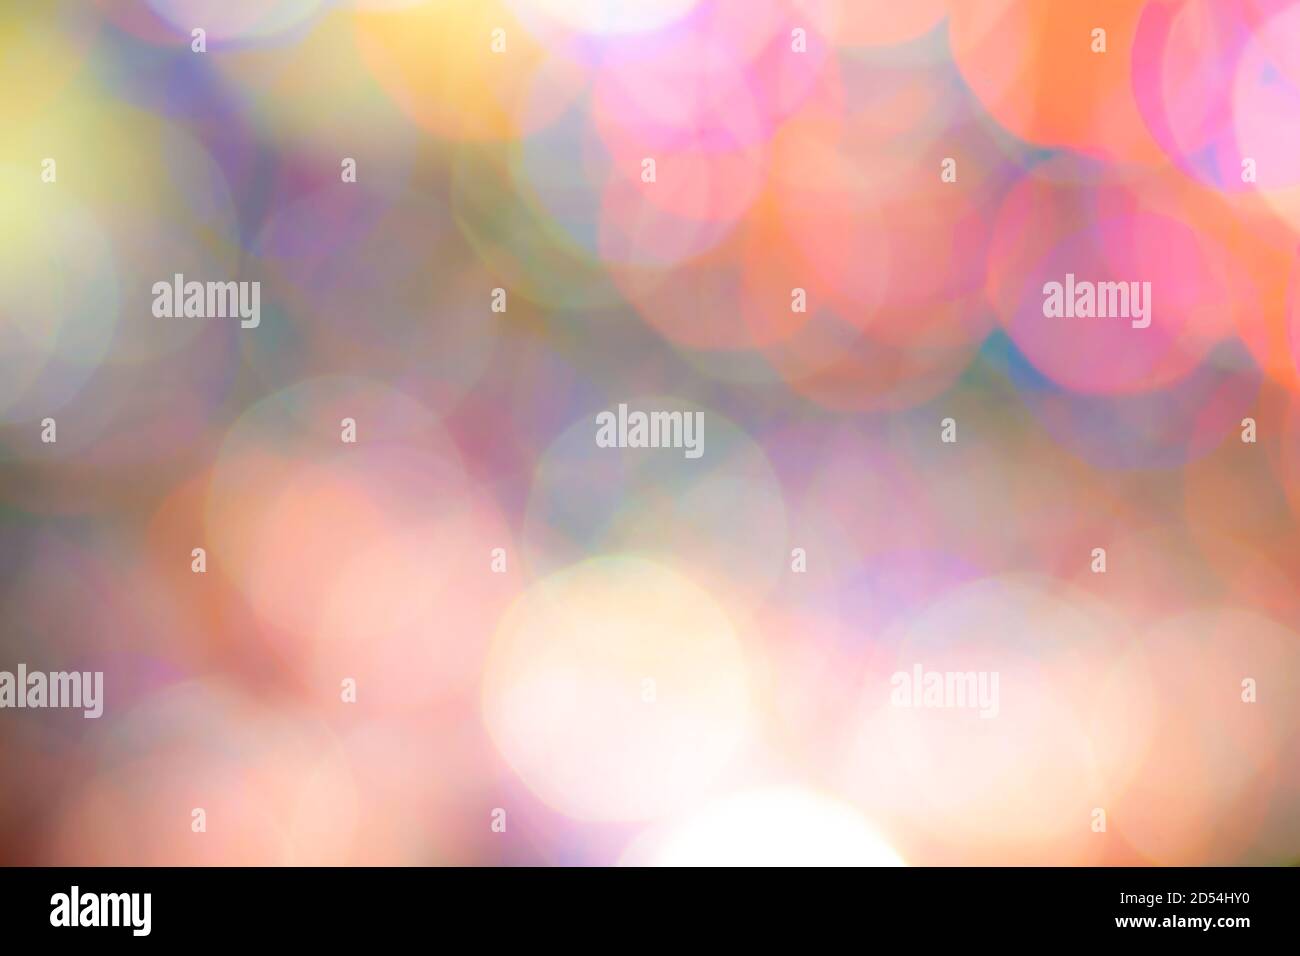 colored blurry round spots of warm shades for pale red background Stock Photo